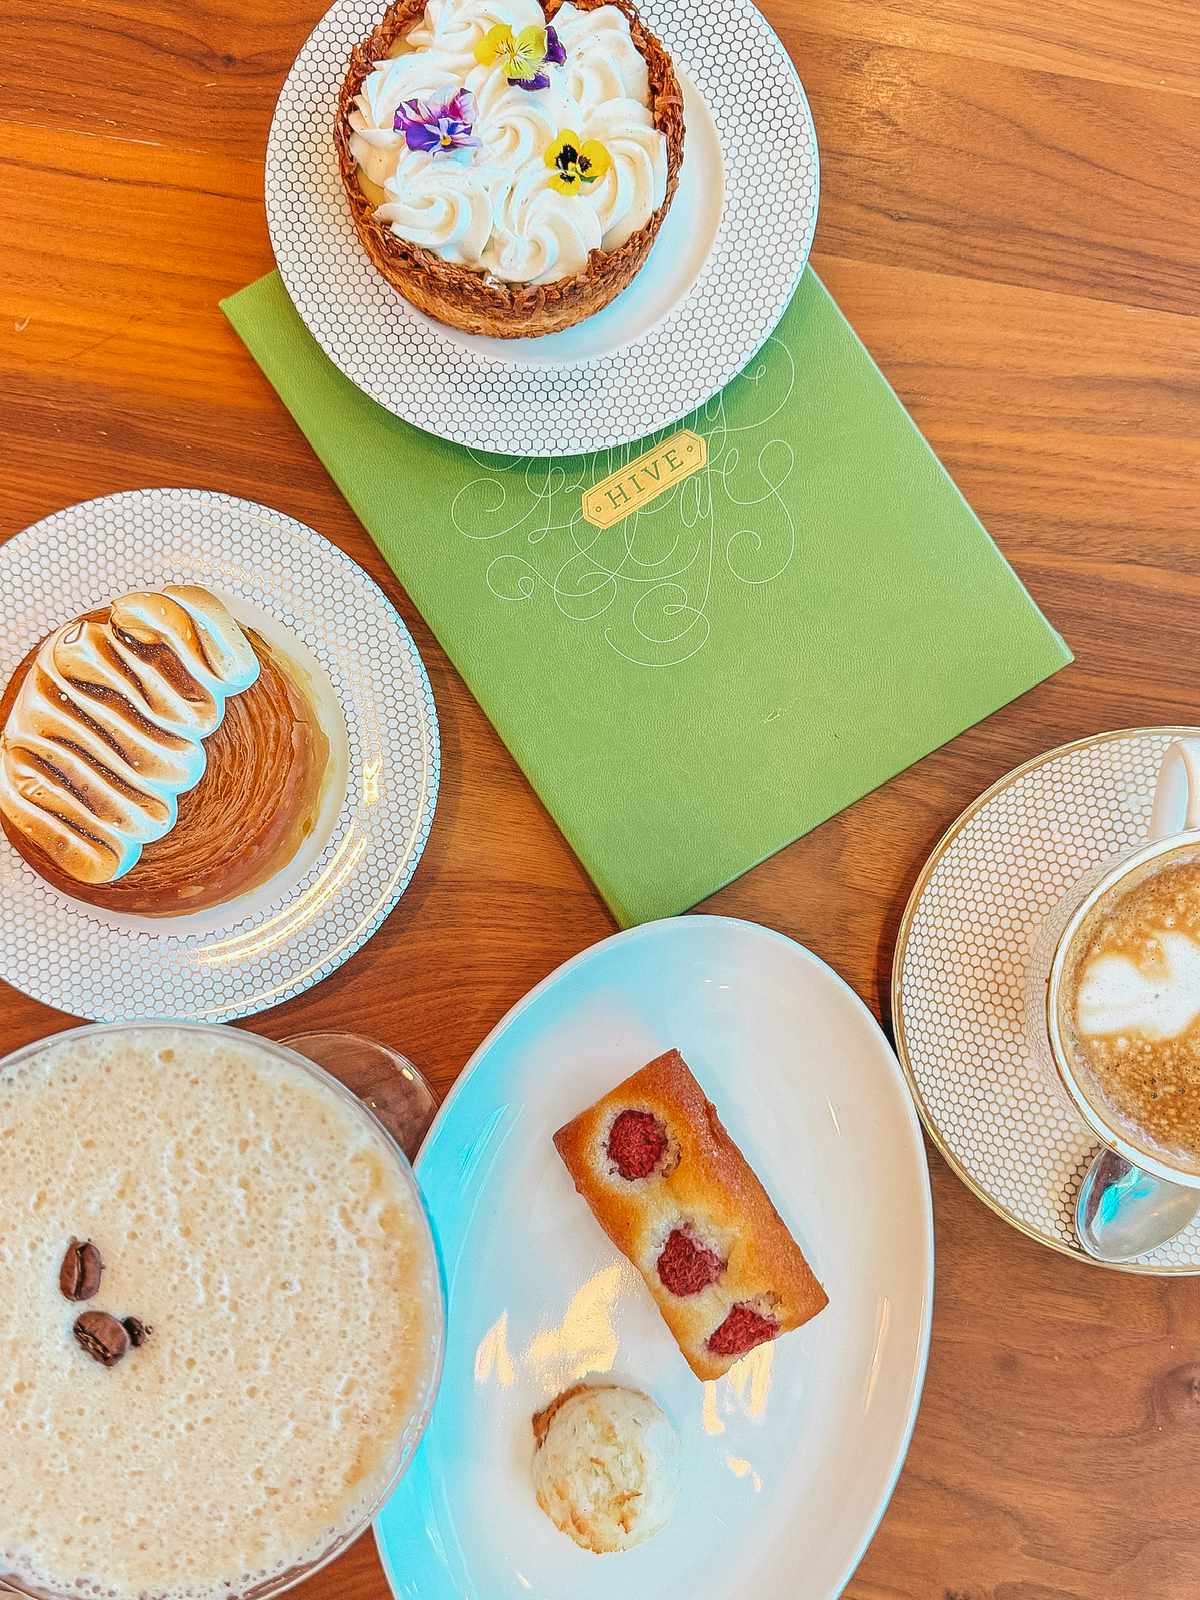 Pastry spread at The Hive Bakery and Cafe in West Palm Beach